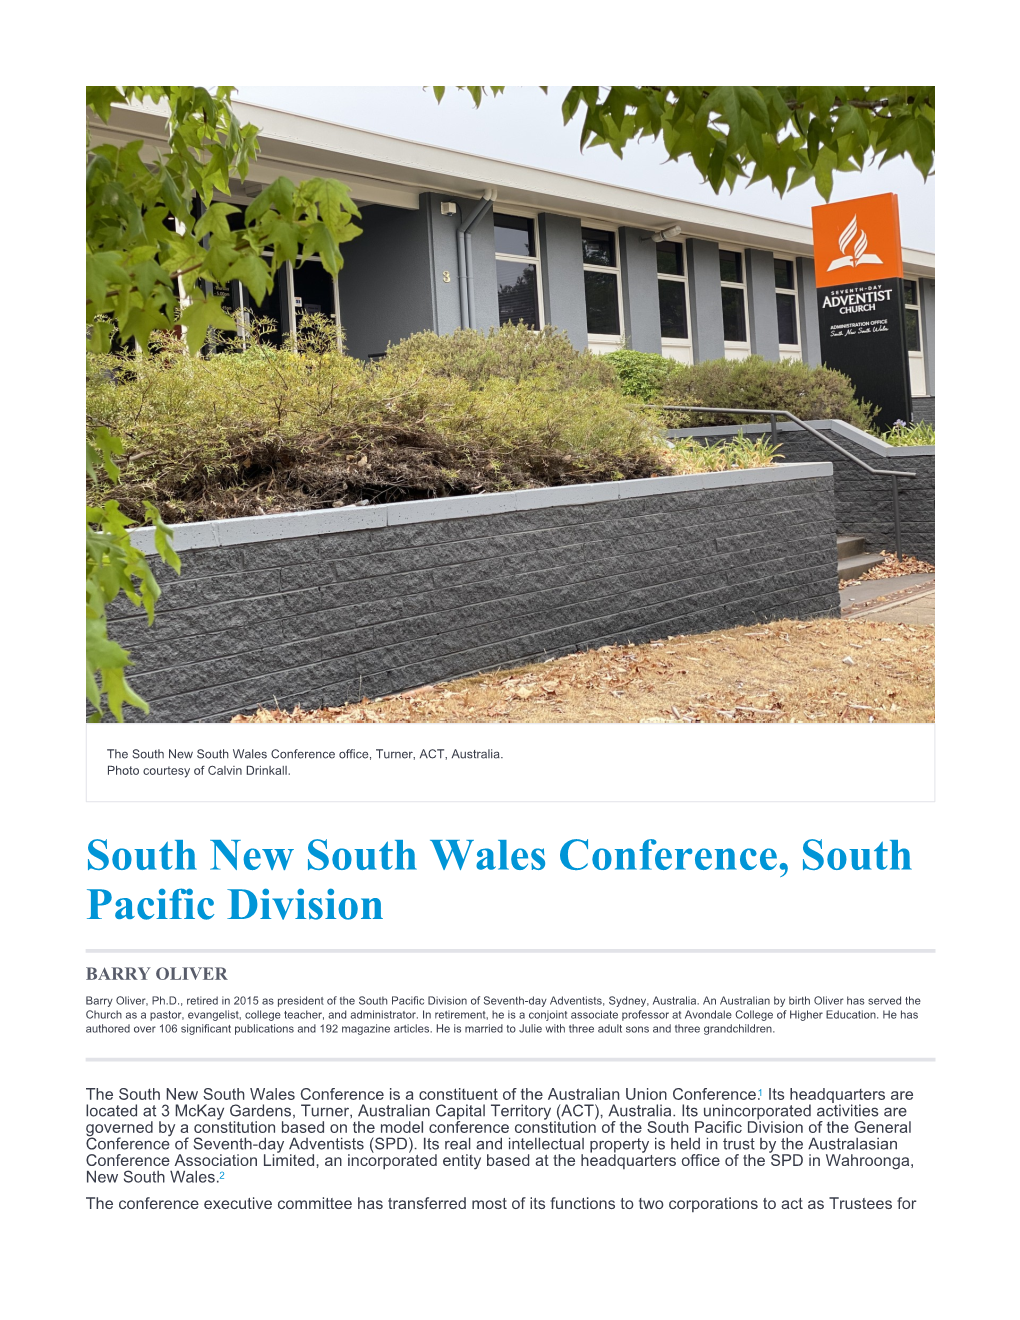 South New South Wales Conference, South Pacific Division